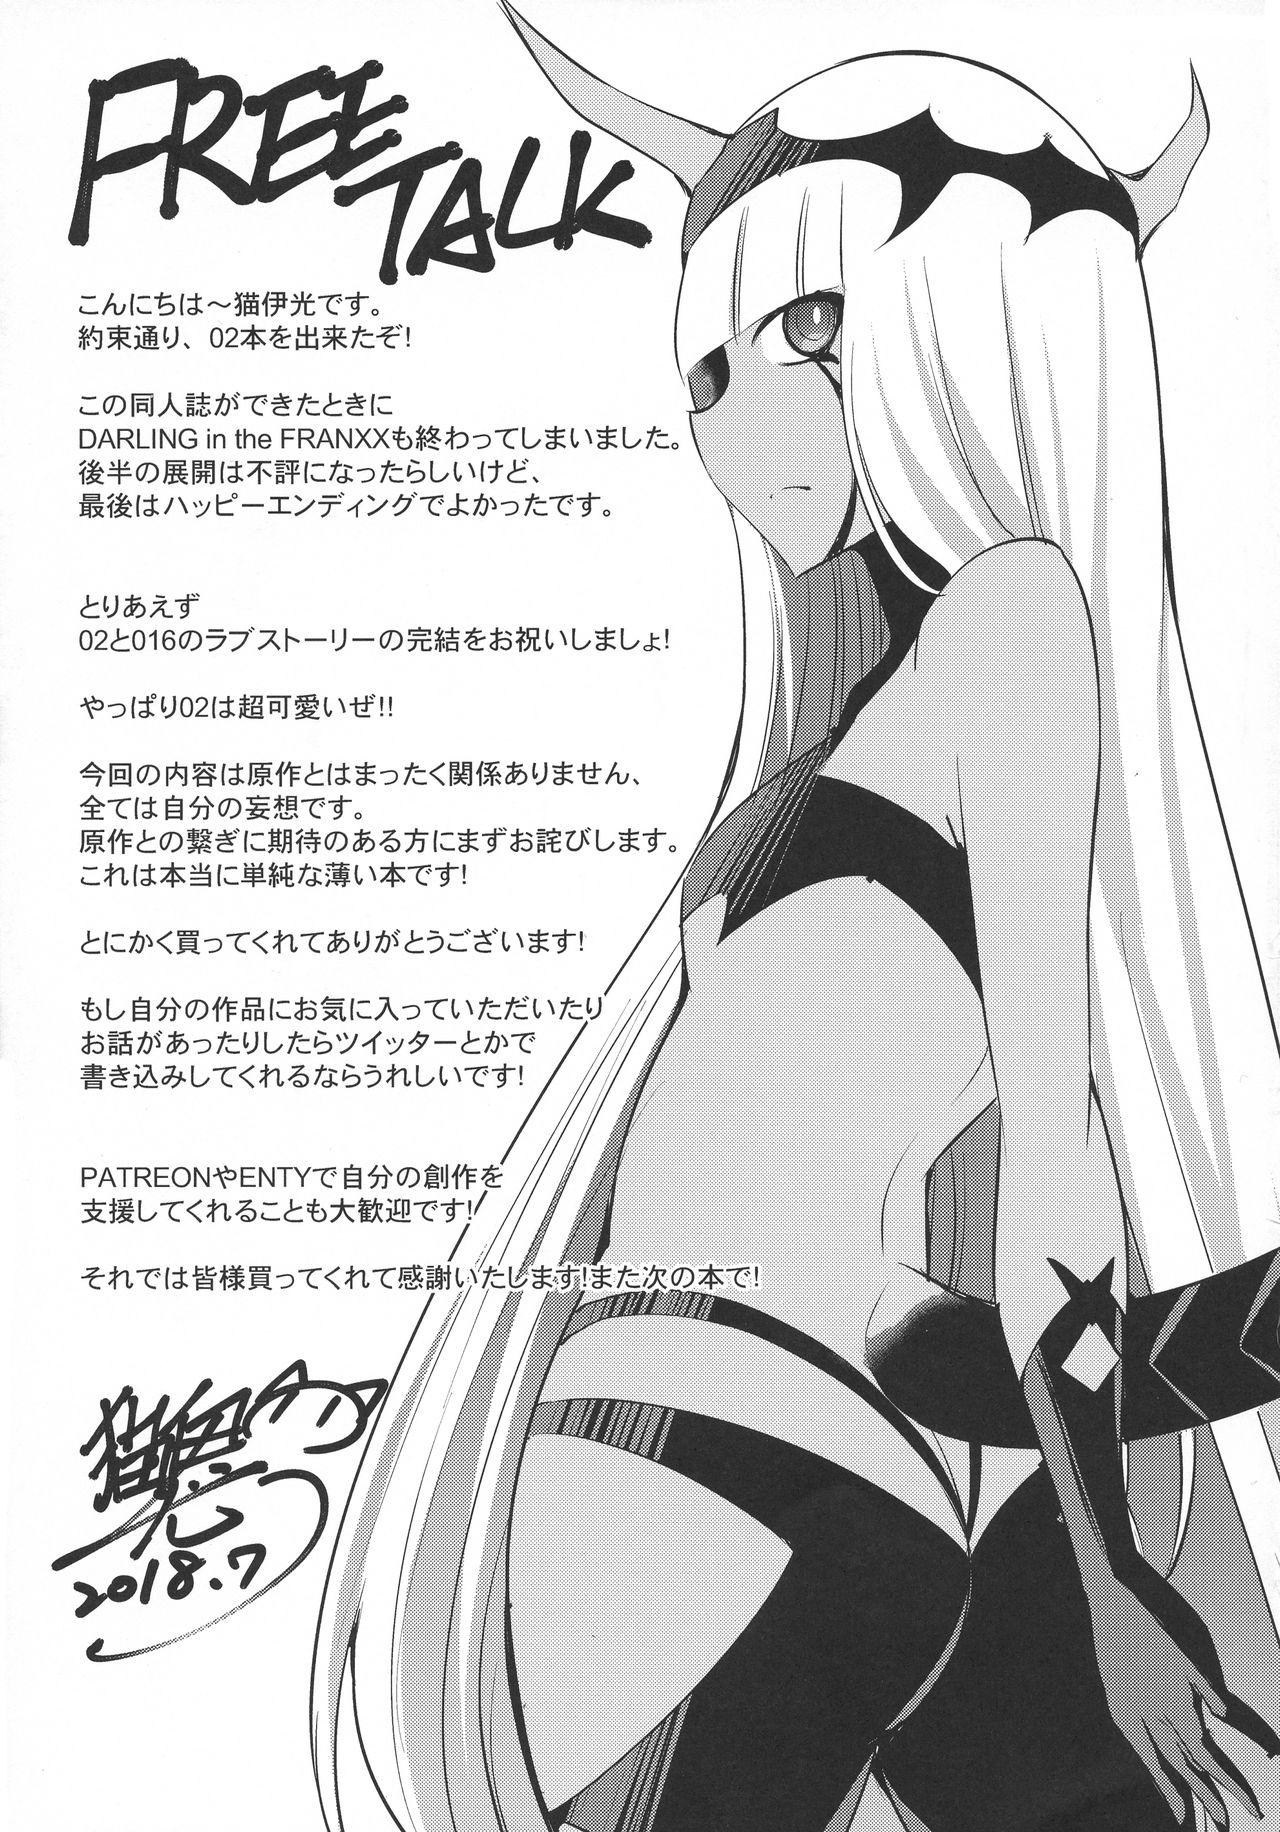 Hot Girl Darling in the One and Two - Darling in the franxx Girls Getting Fucked - Page 16